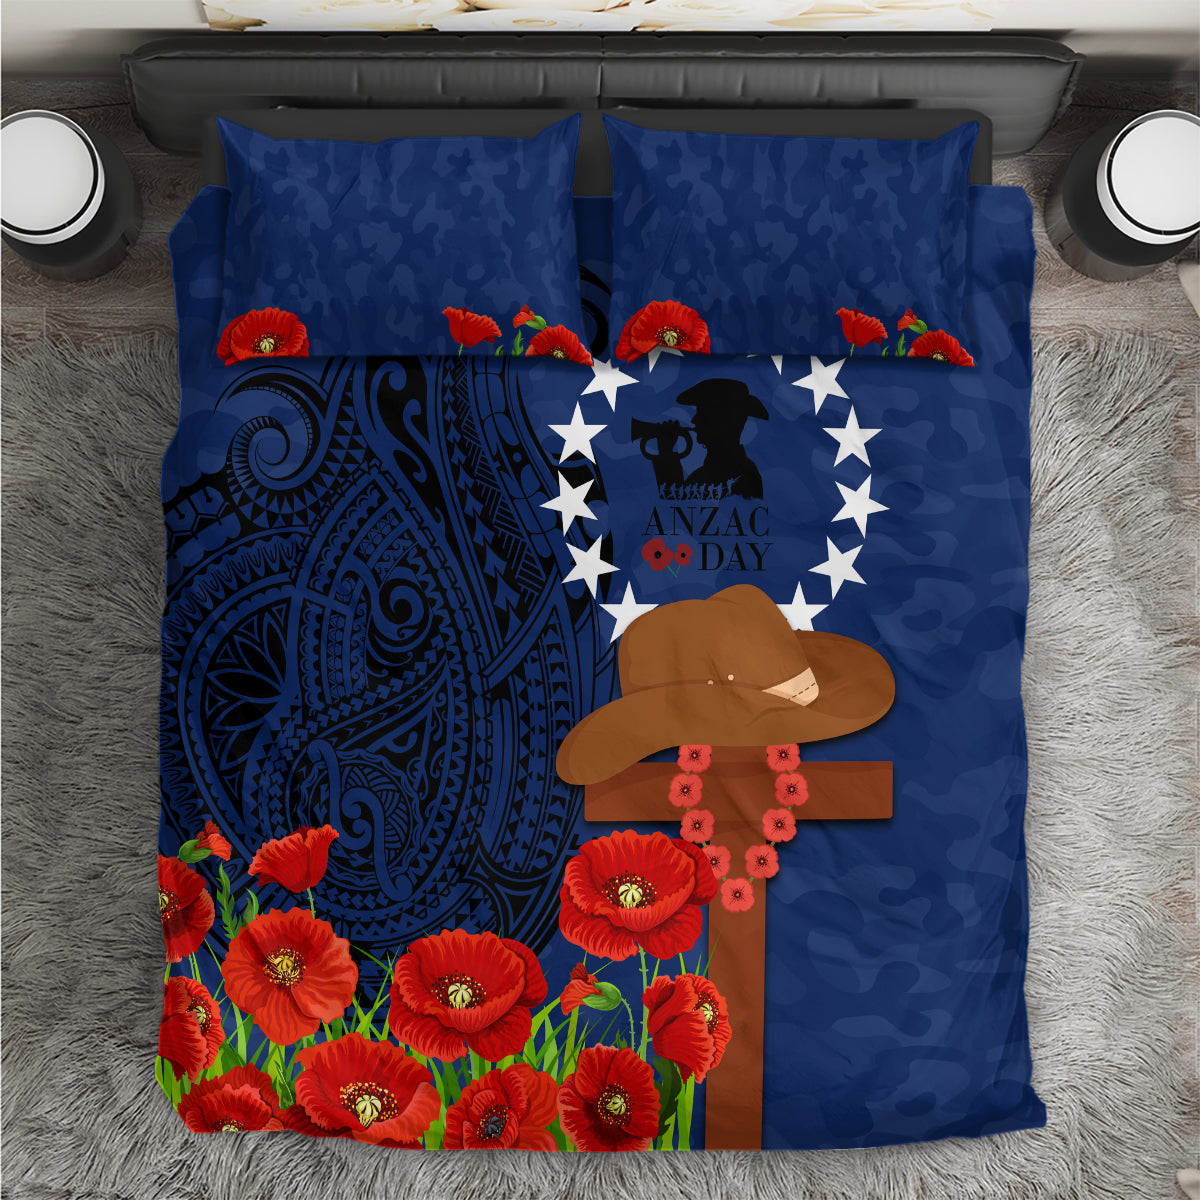 Cook Islands ANZAC Day Bedding Set Soldier Paying Respect We Shall Remember Them LT03 Blue - Polynesian Pride